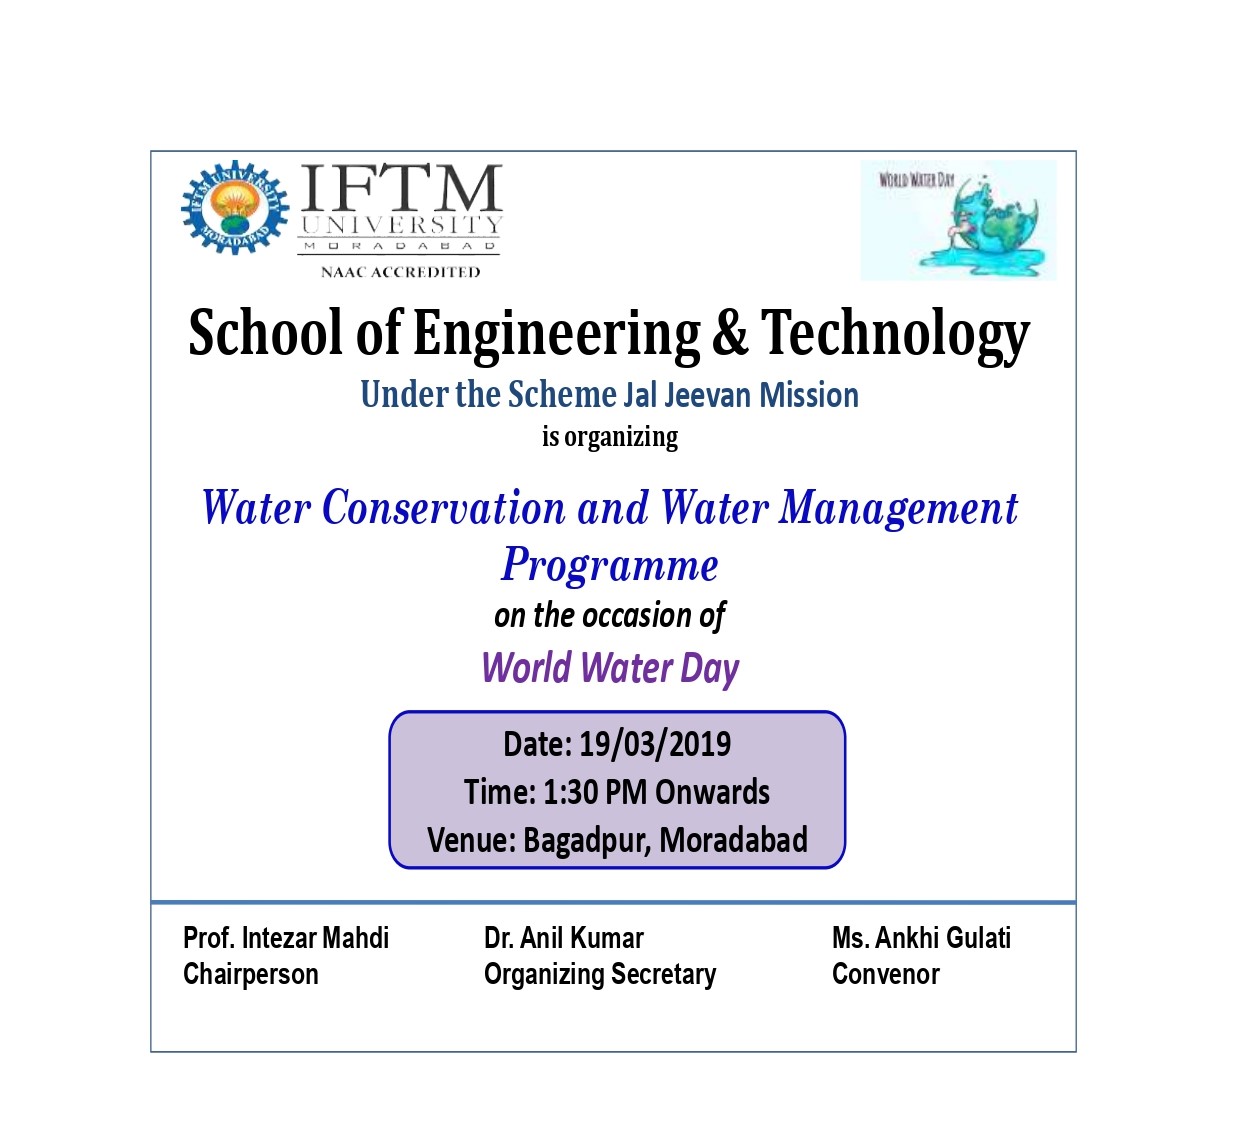 Water Conservation and Water Management Programme on the occusion World Water Day 22.3